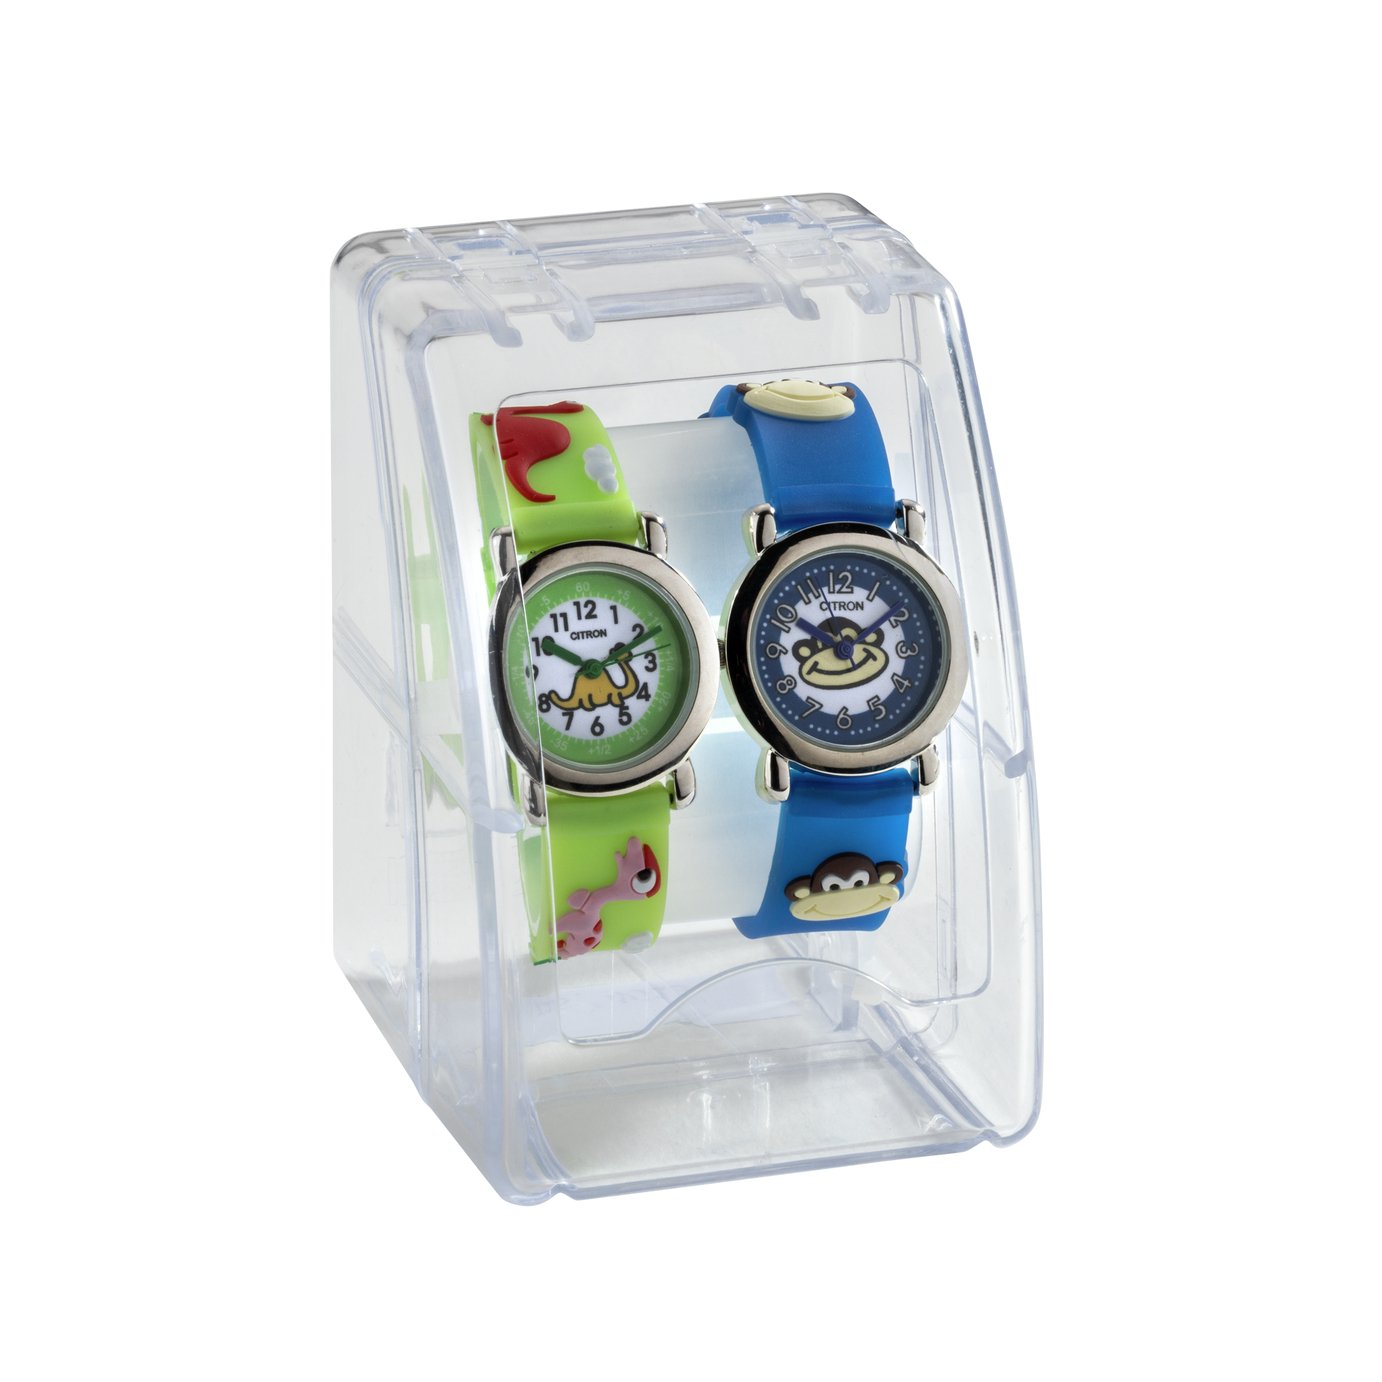 Citron Silicon Character Strap Children's Watch - Set of 2